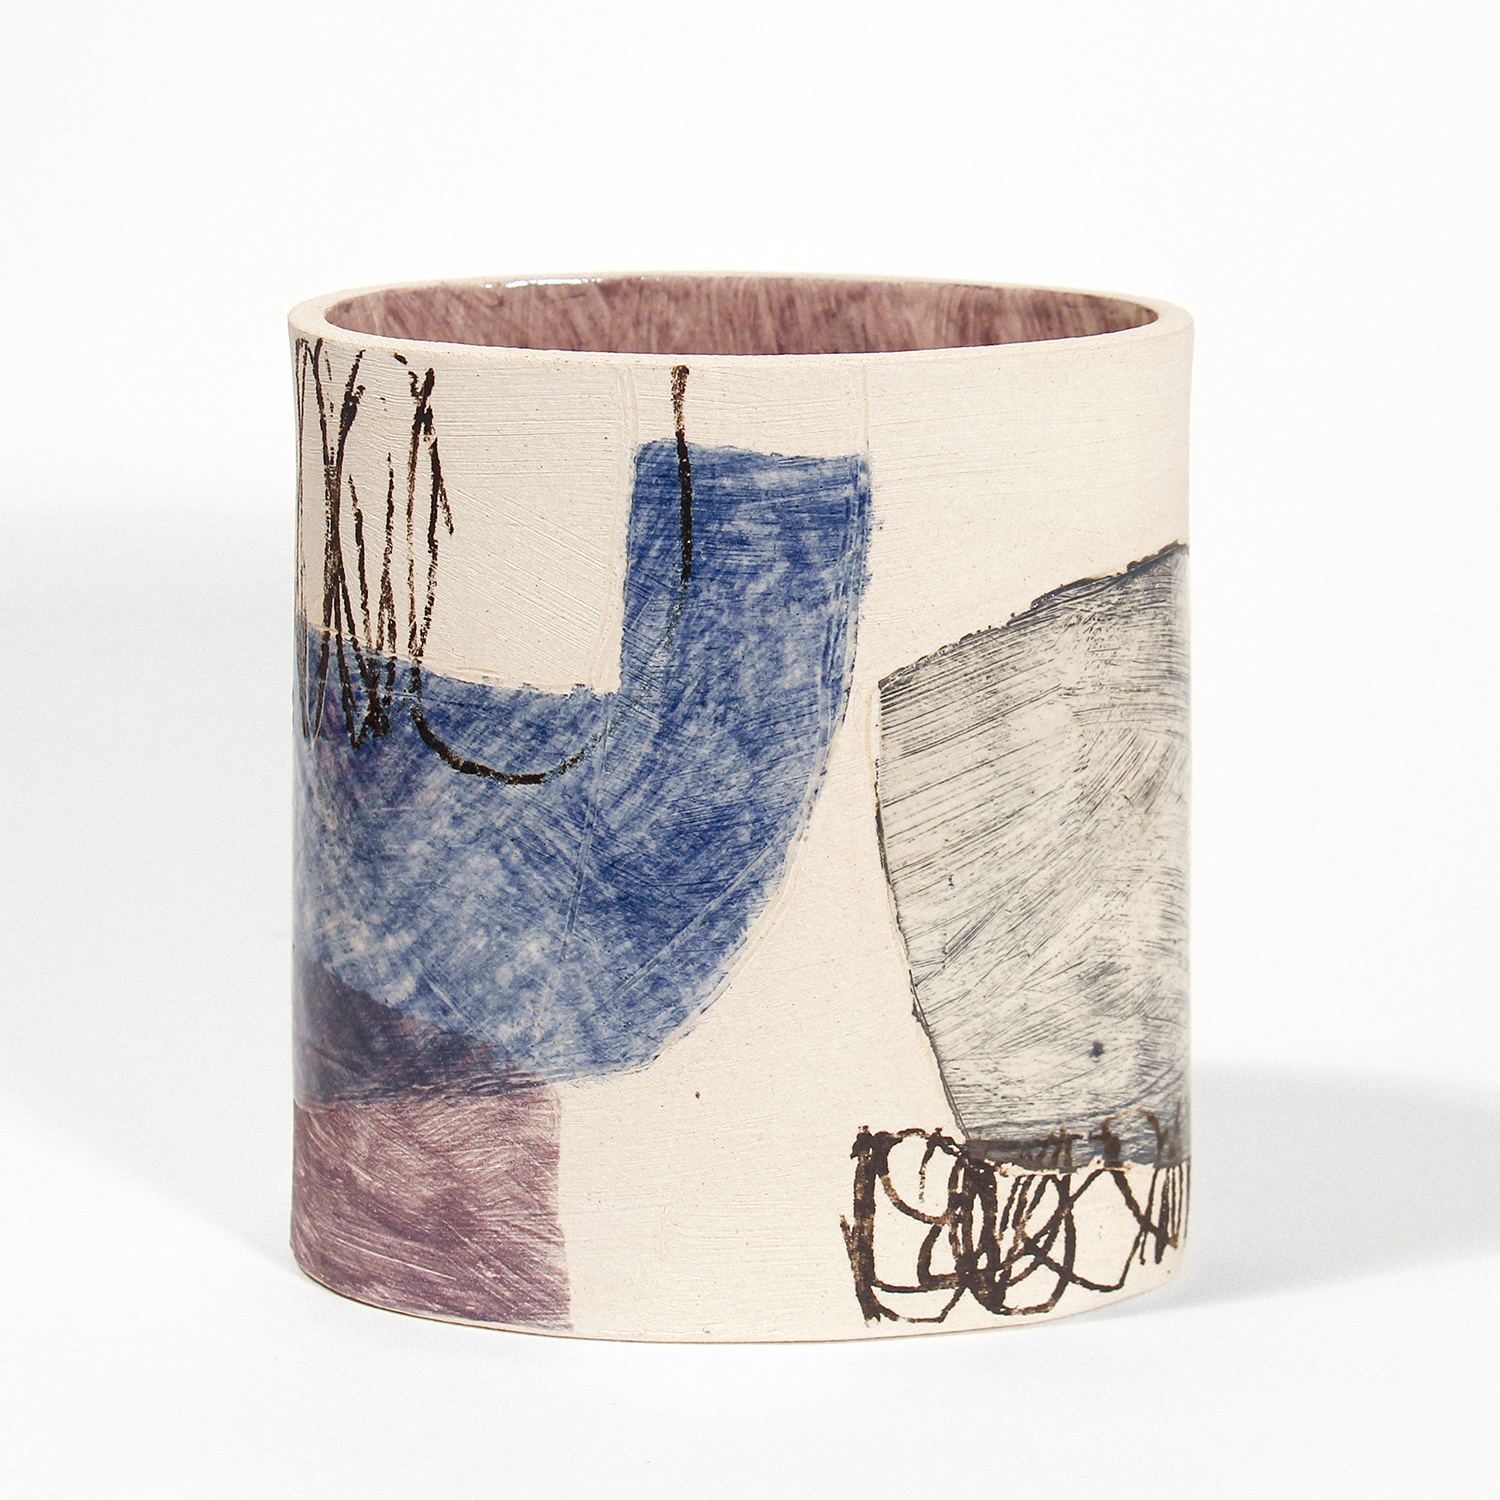 Medium Narrow Oval Vessel by Louise McNiff